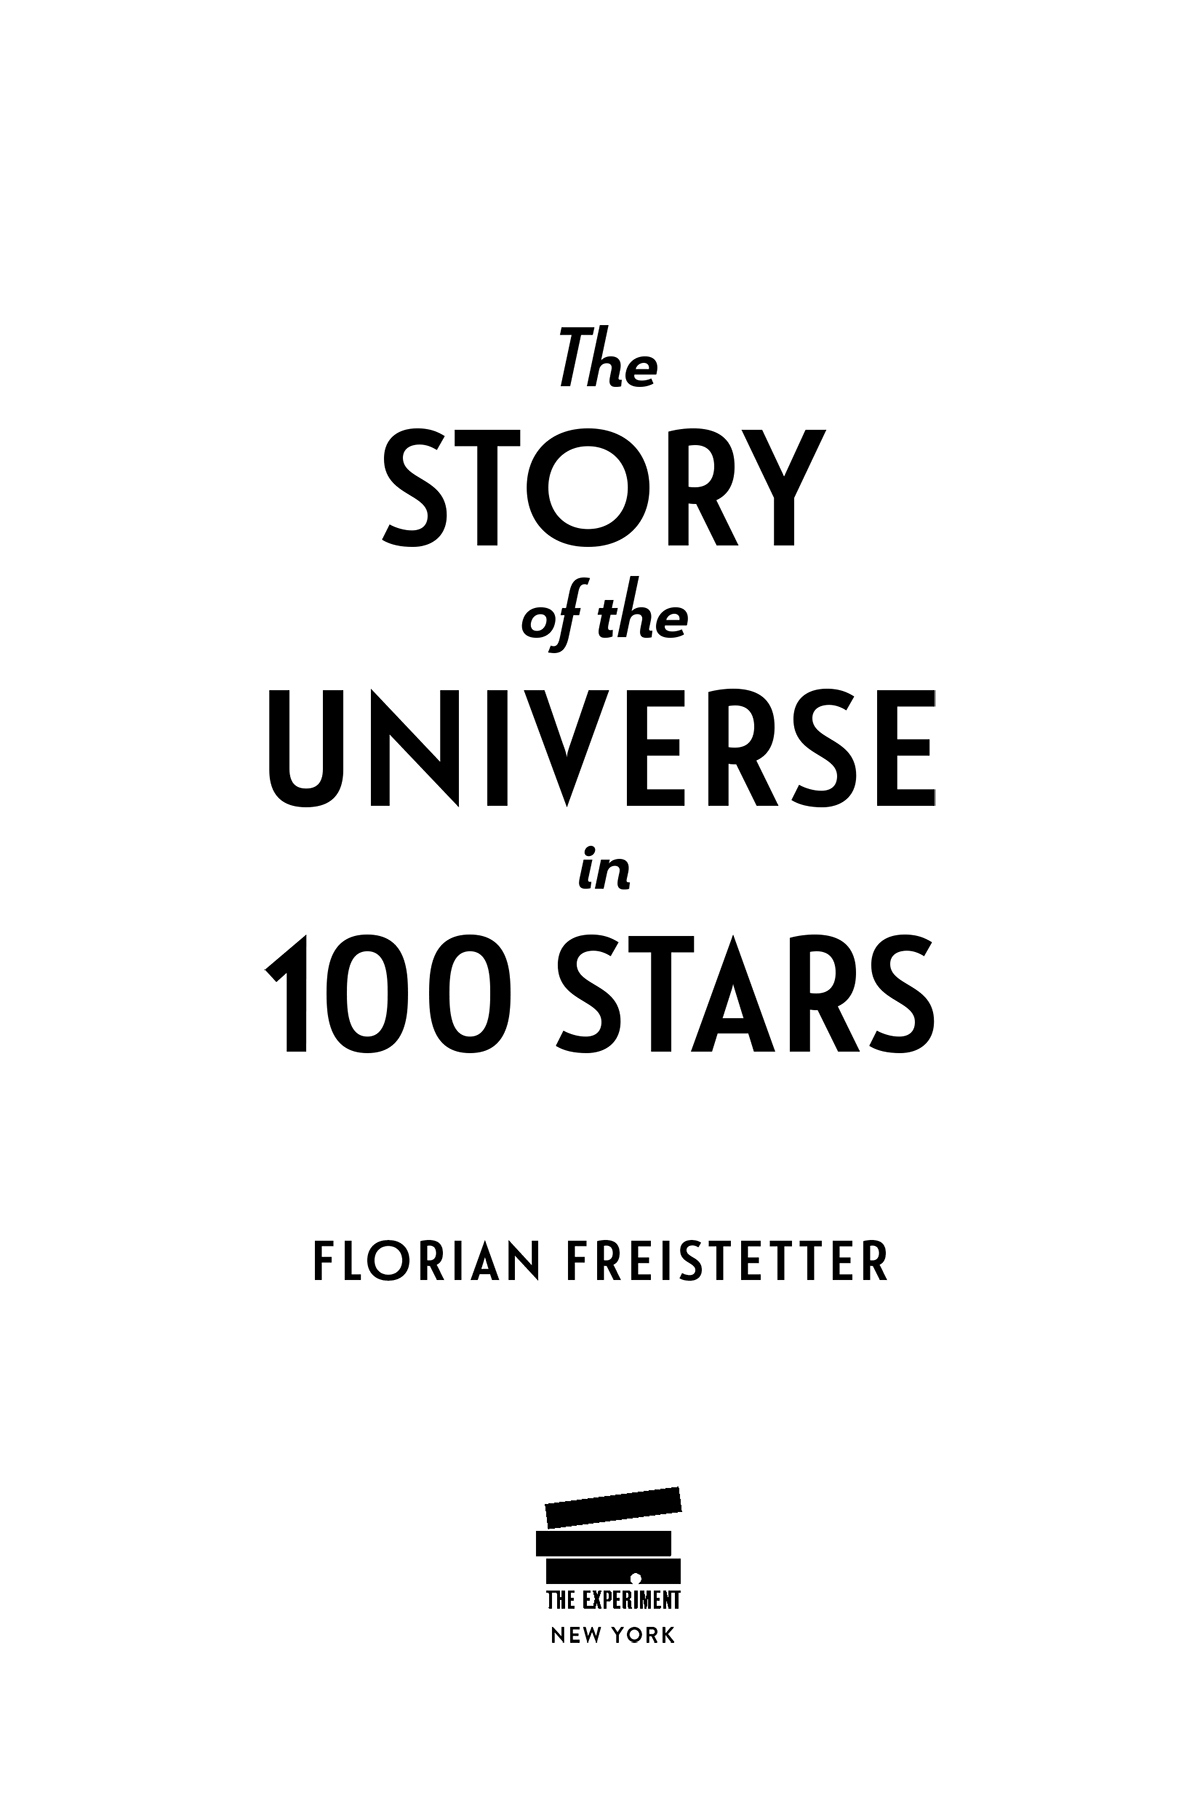 Contents Introduction The Story of the Universe in 100 Stars are 100 stars - photo 2